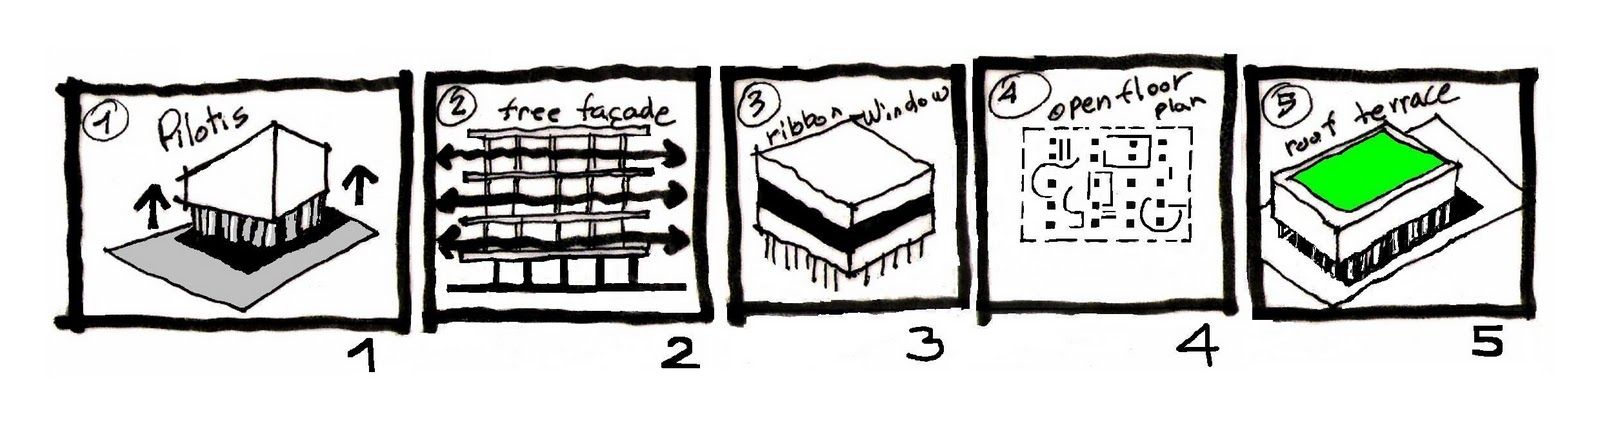 5 points of architecture, Corbusier